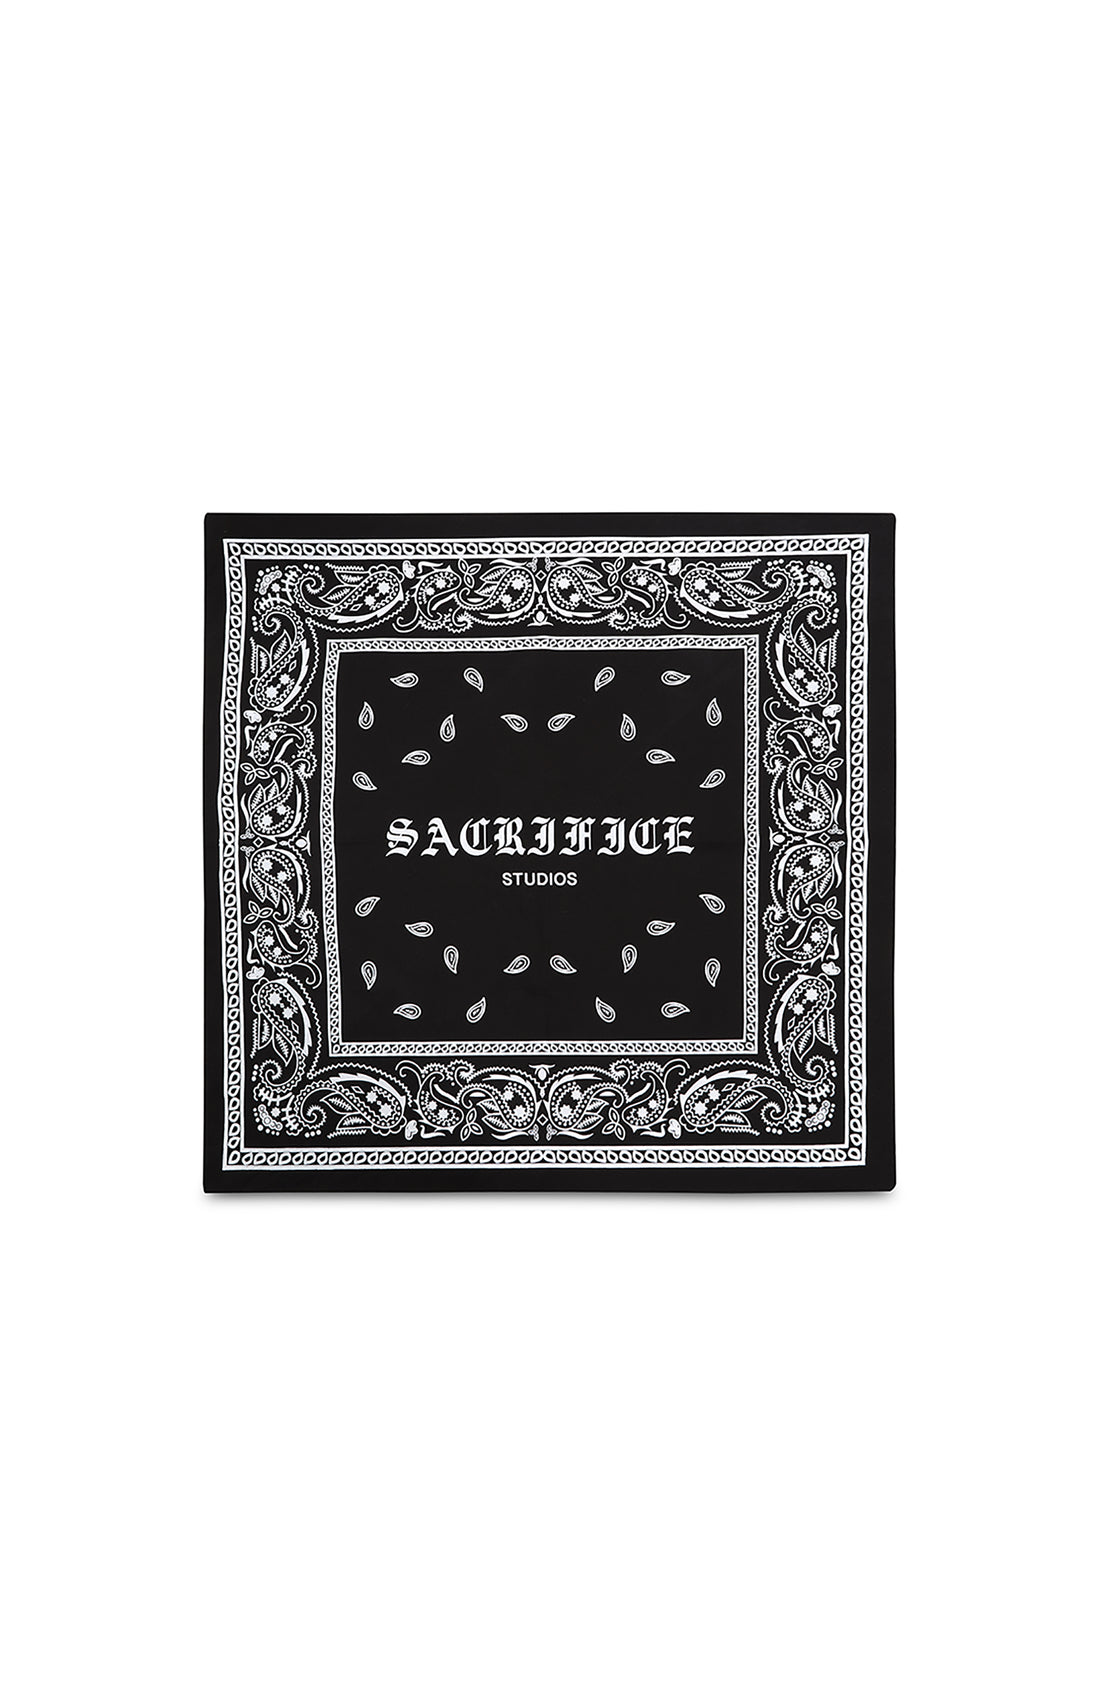 Premium bandana featuring a bold white graphic print. Expertly crafted in Portugal. Located in Dubai. 